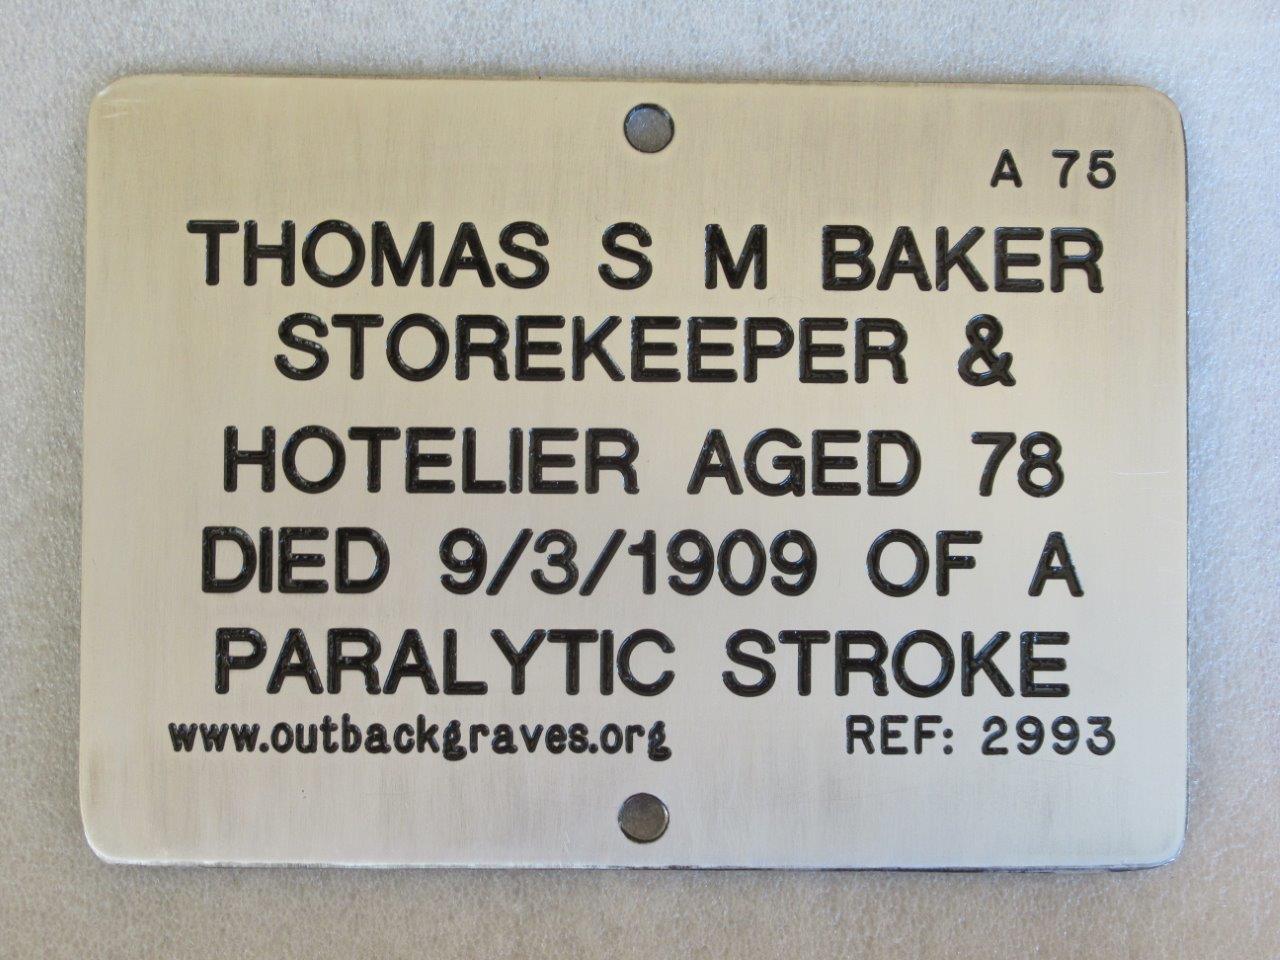 This is a photograph of plaque number 2993 for THOMAS S M BAKER at Mt MORGANS